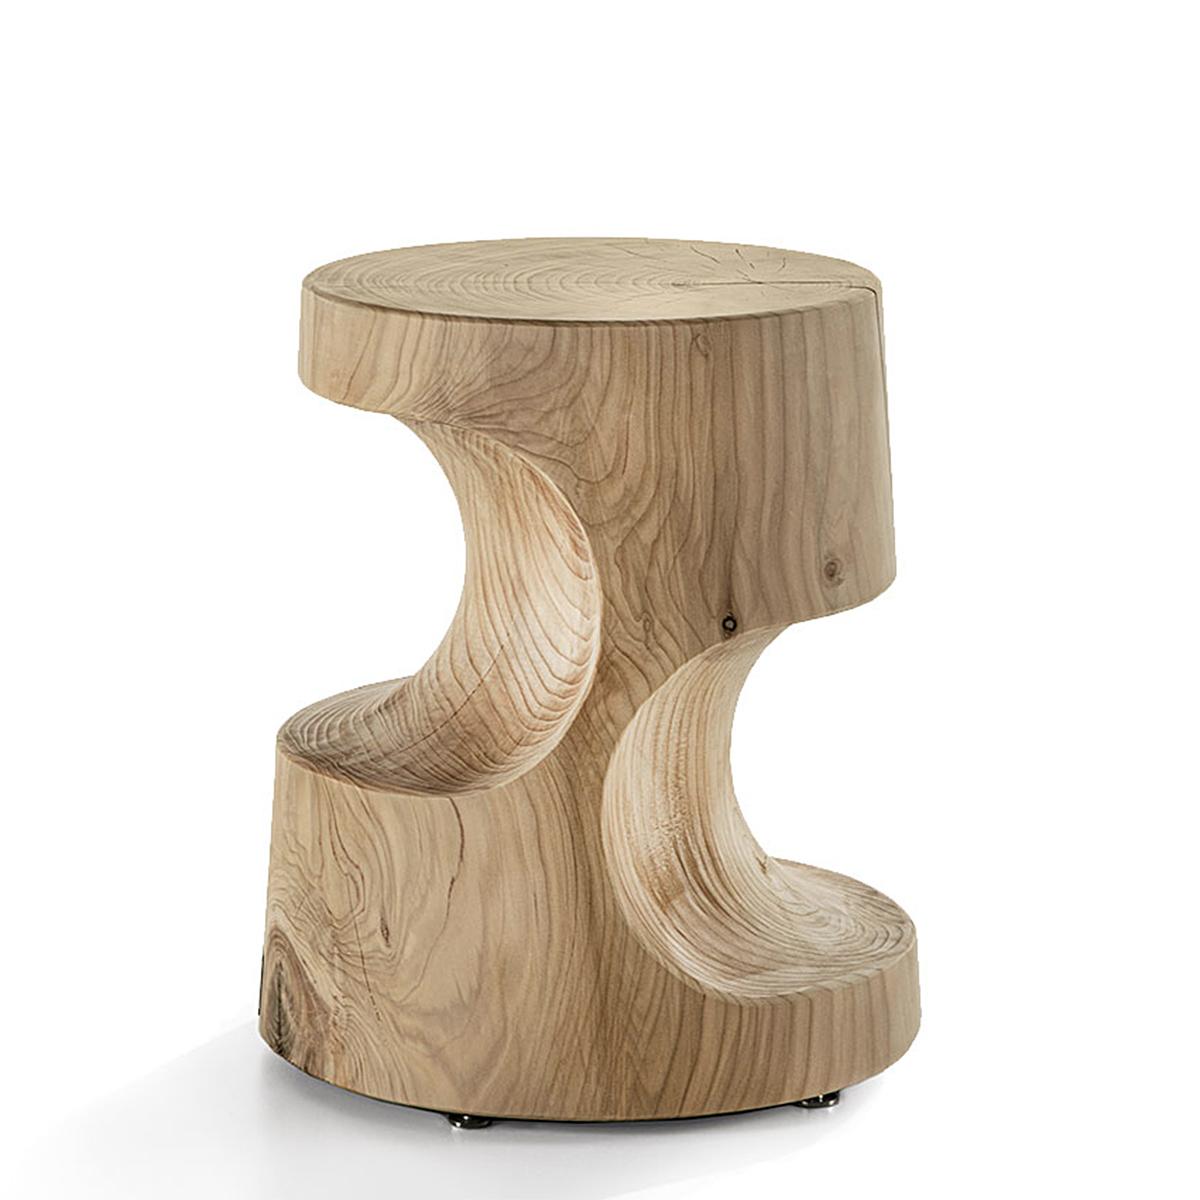 Stool Pathfinder Cedar made in a block of natural cedar 
trunk. Treated with wax with natural pine extracts. Solid 
cedar wood include movement, cracks and changes in 
wood conditions, this is the essential characteristic of 
natural solid cedar